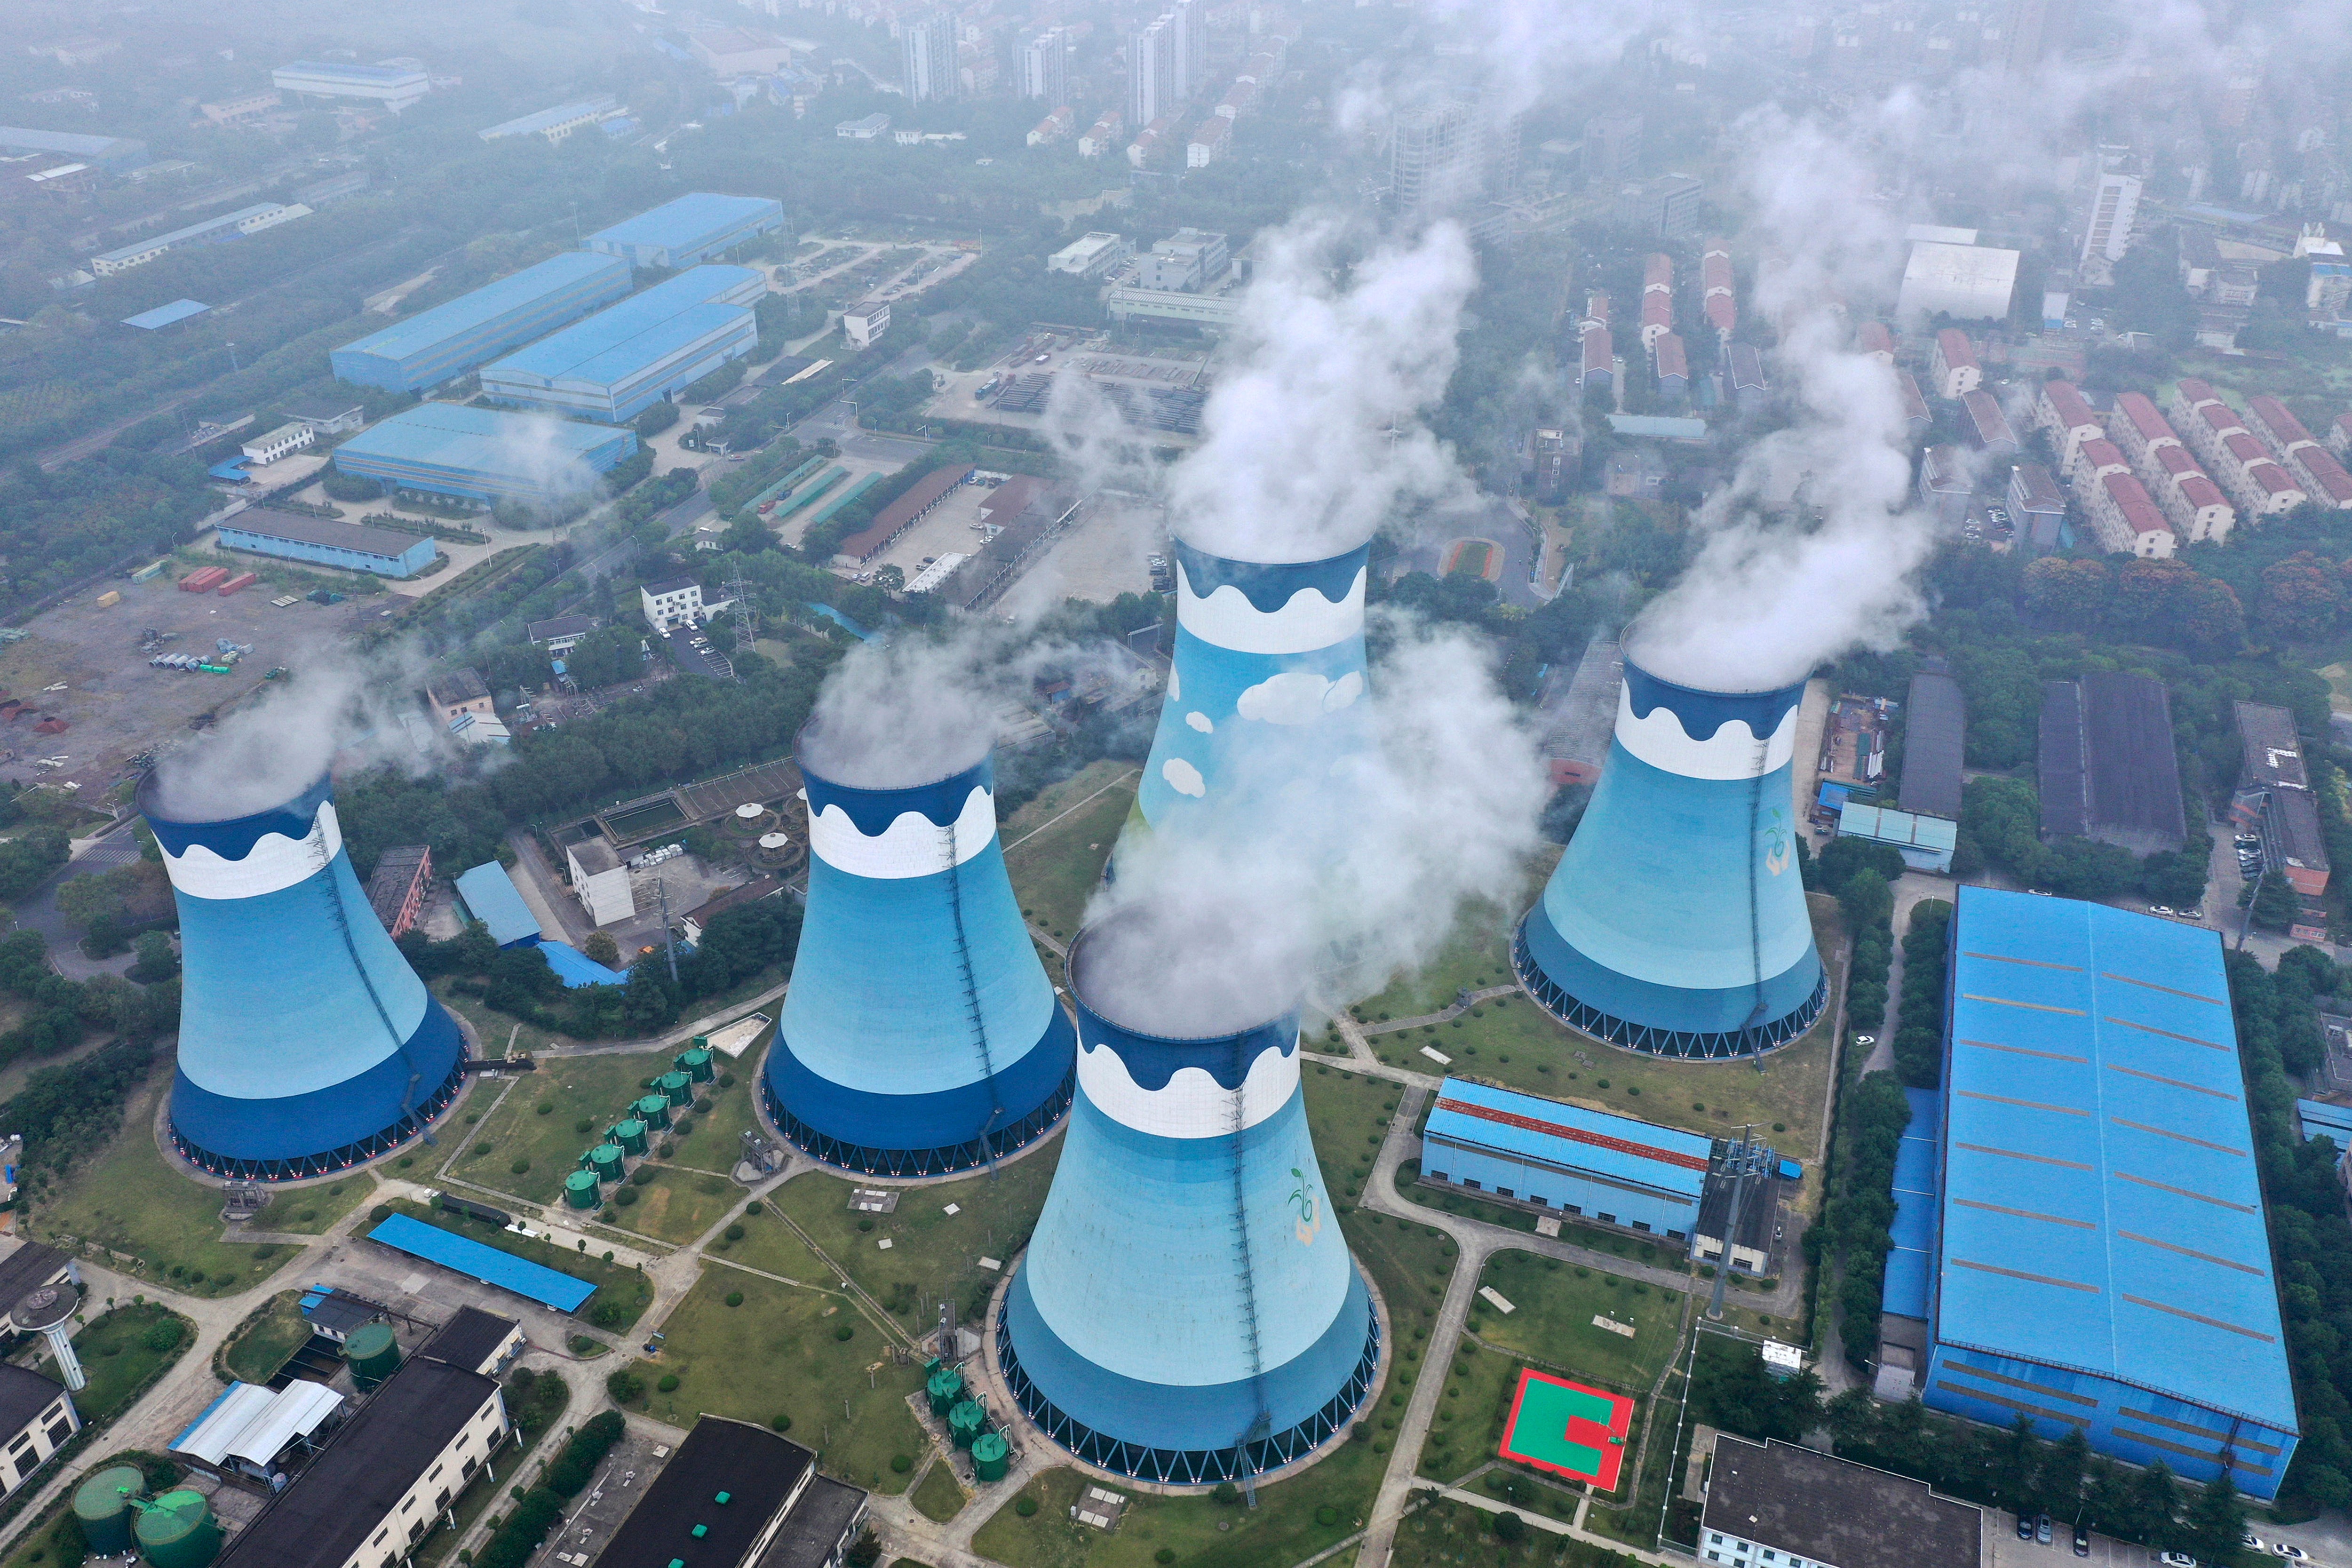 Cooling towers at a coal-fire power station in China. The world’s second largest economy is facing energy shortages